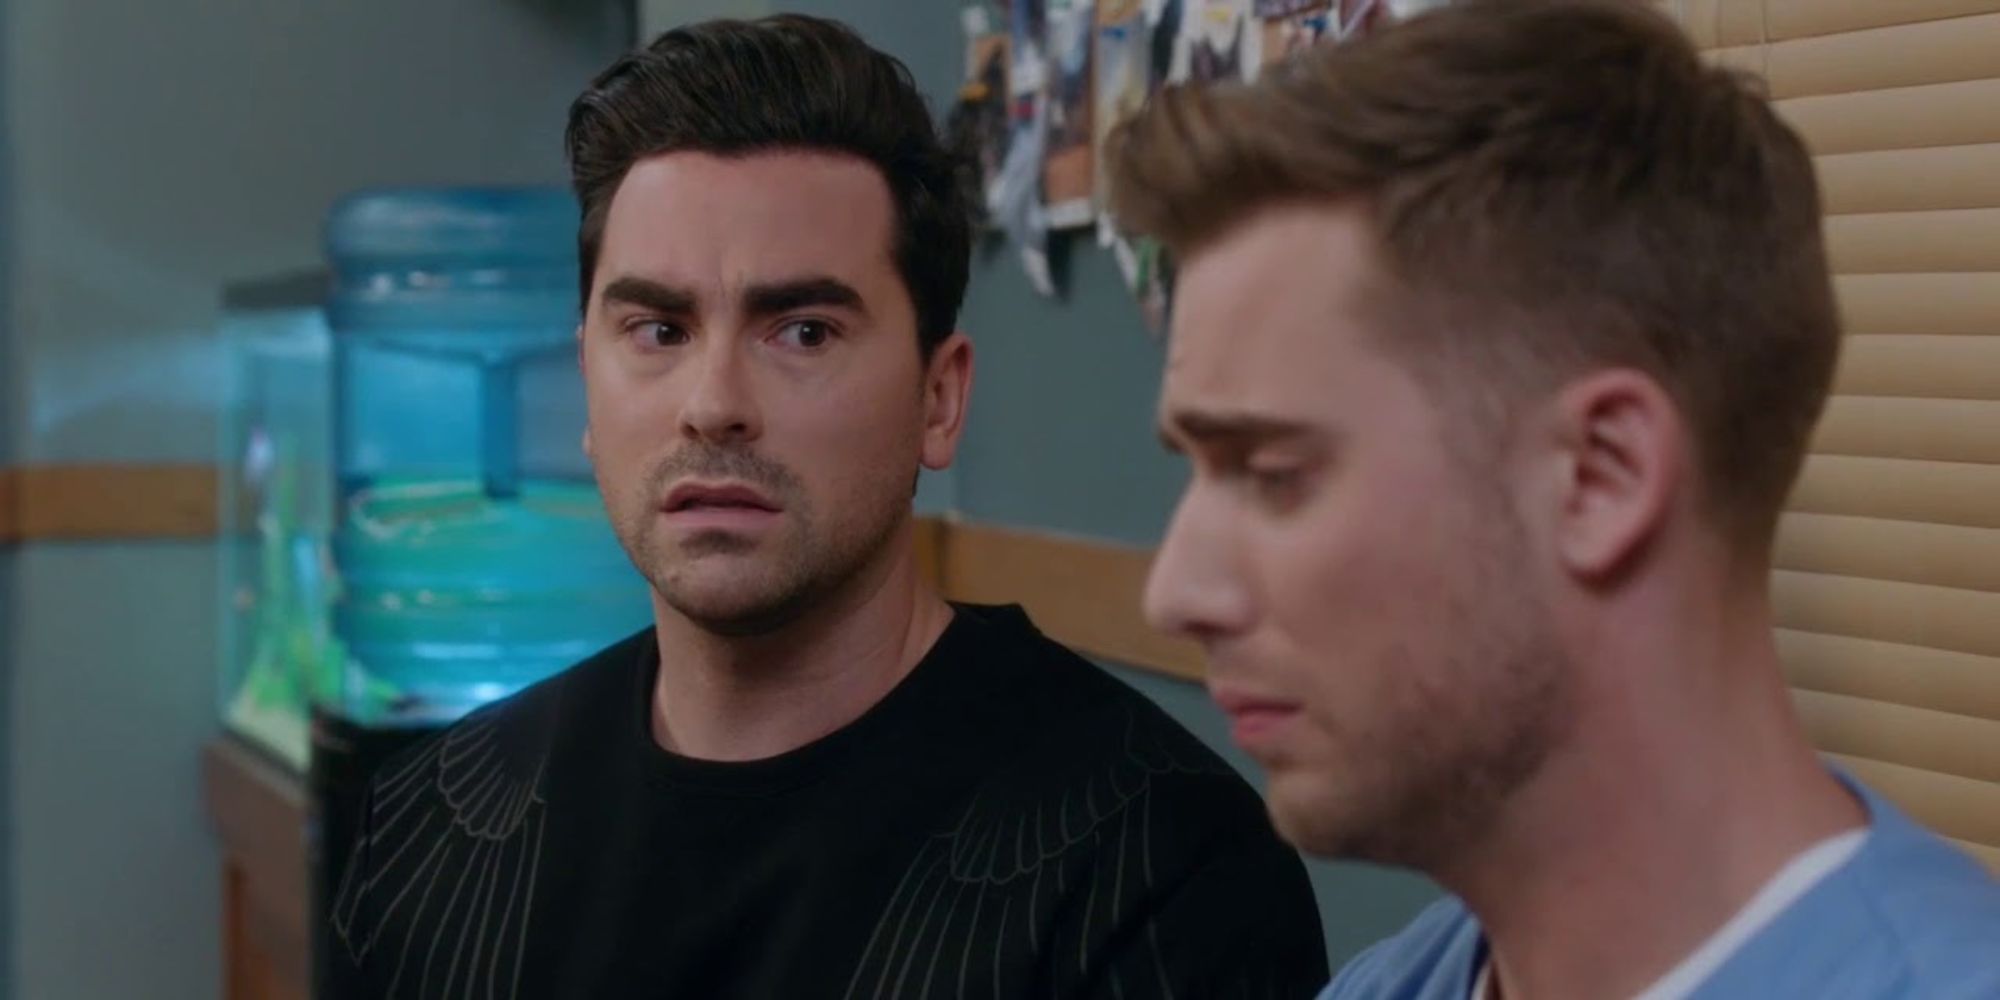 David and Ted from Schitt's Creek